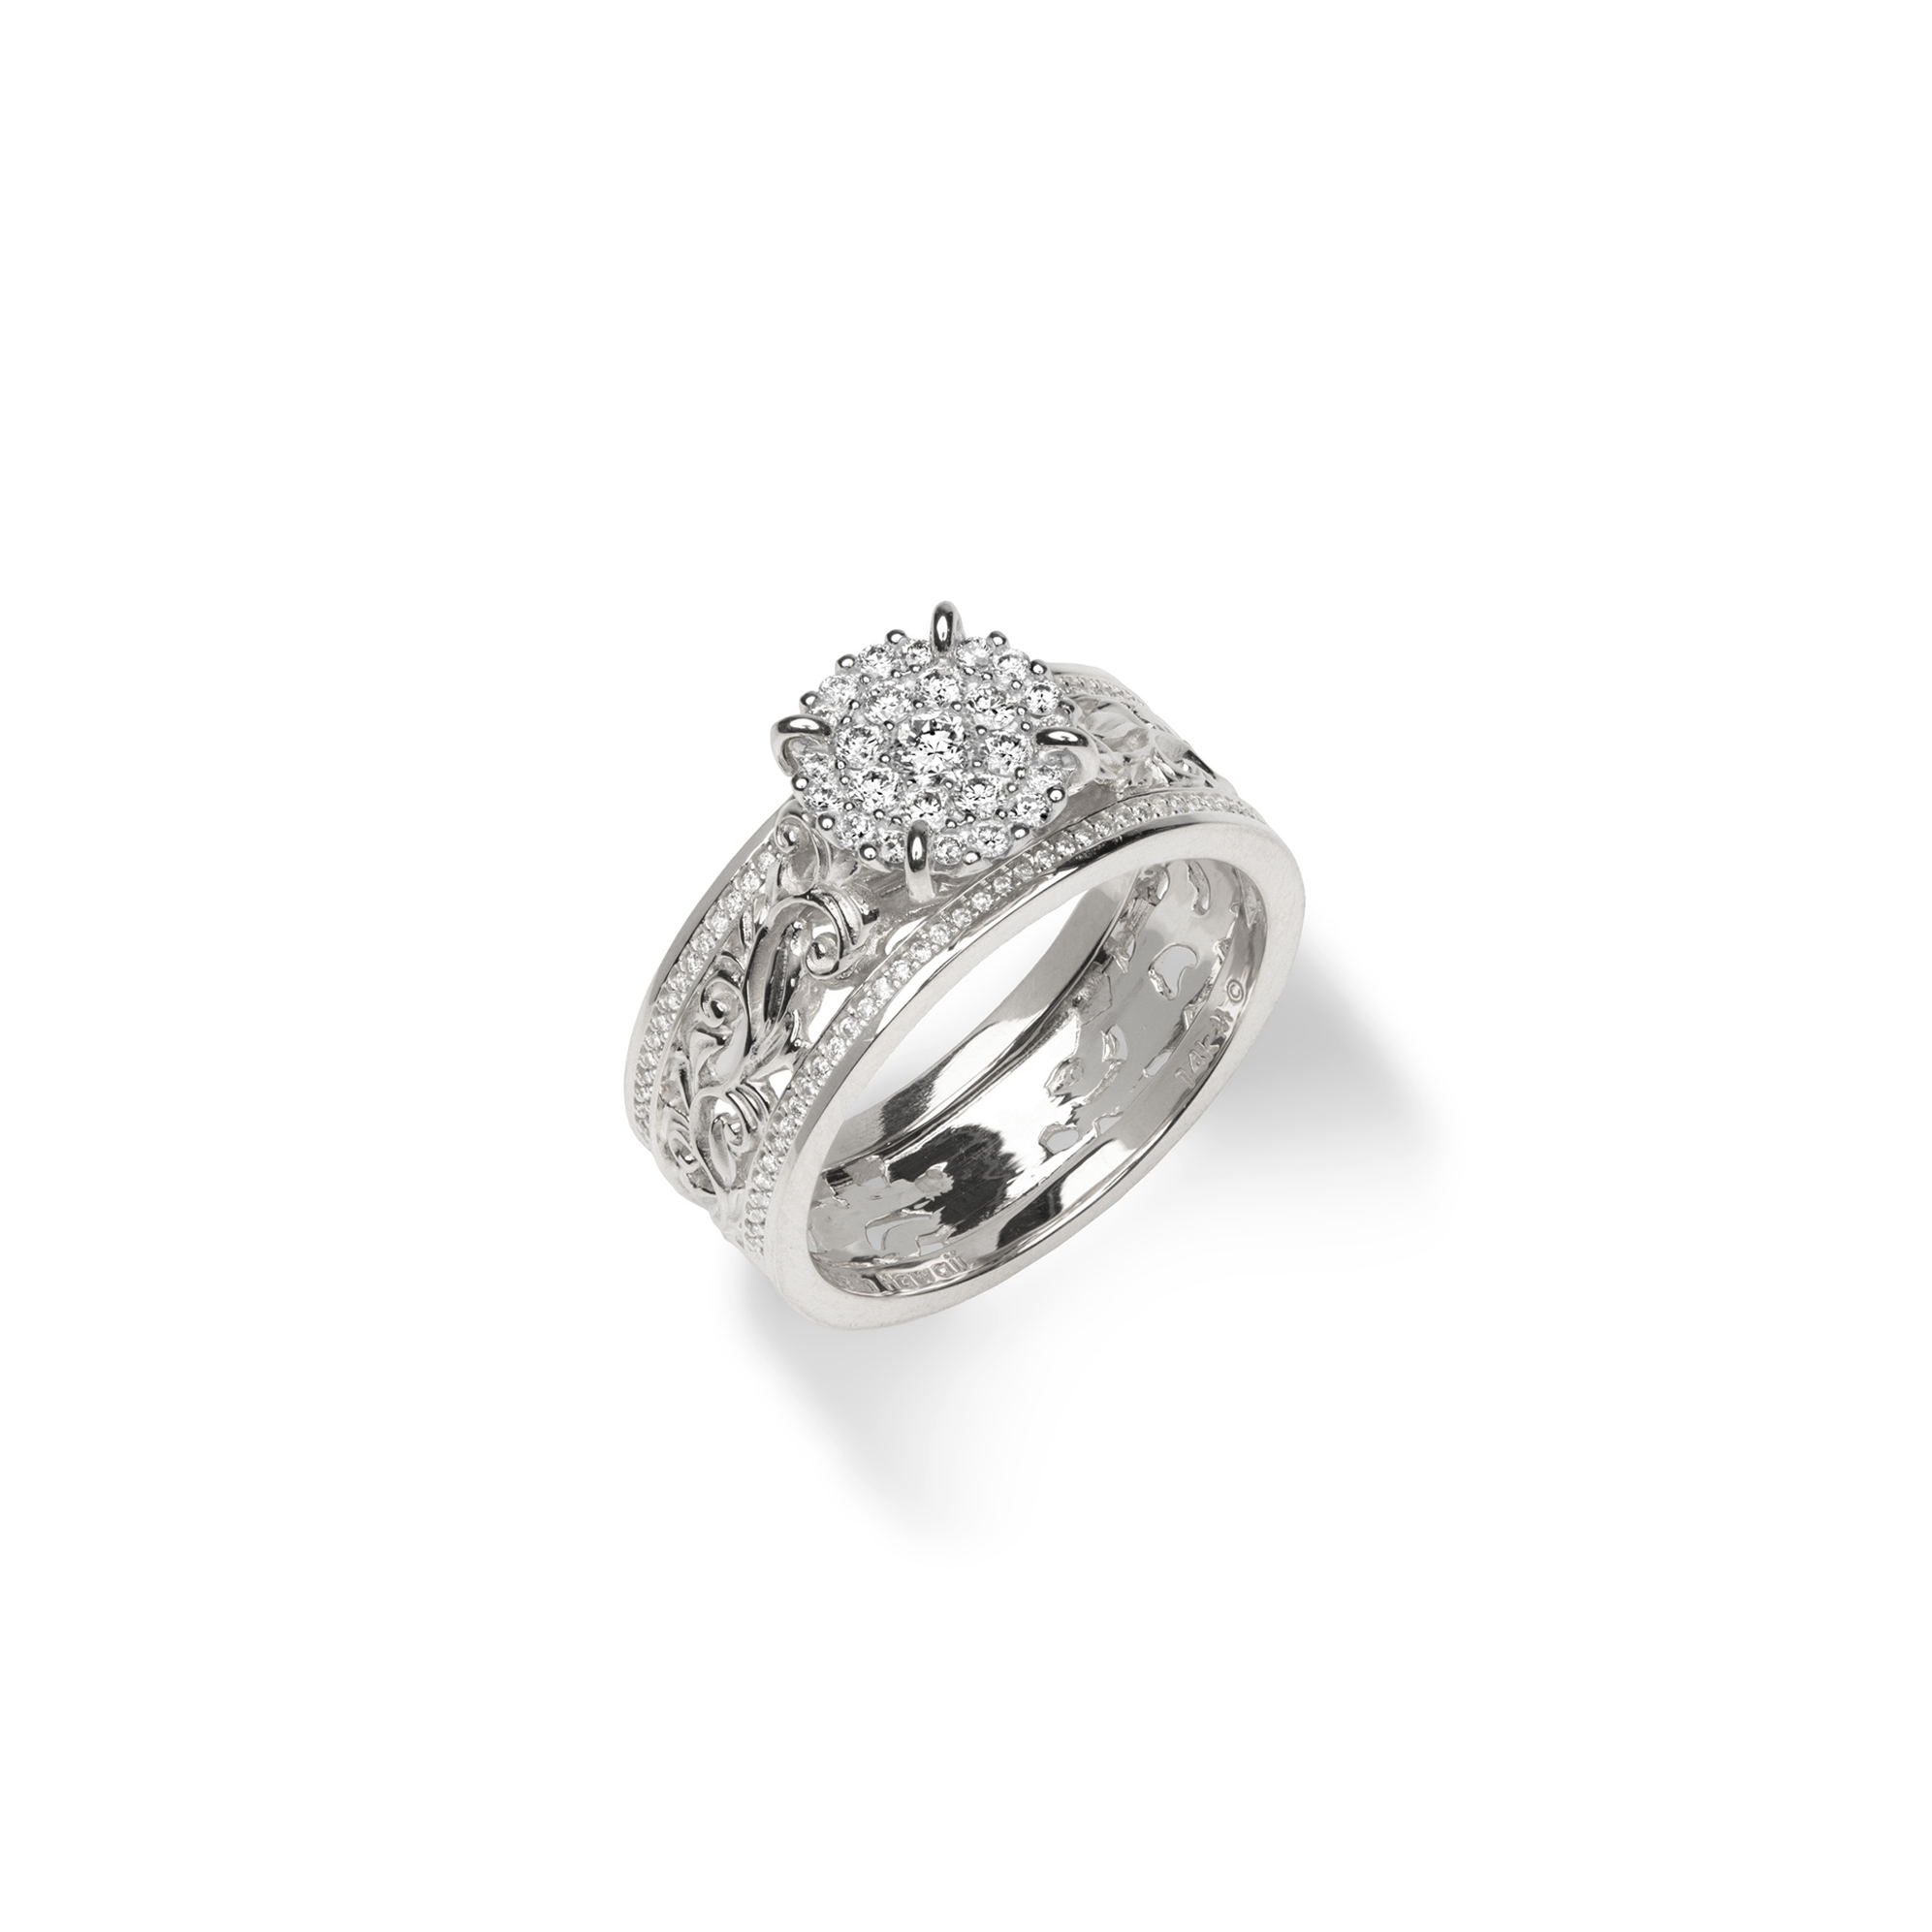 Living Heirloom Engagement Ring in White Gold with Diamonds - 7mm